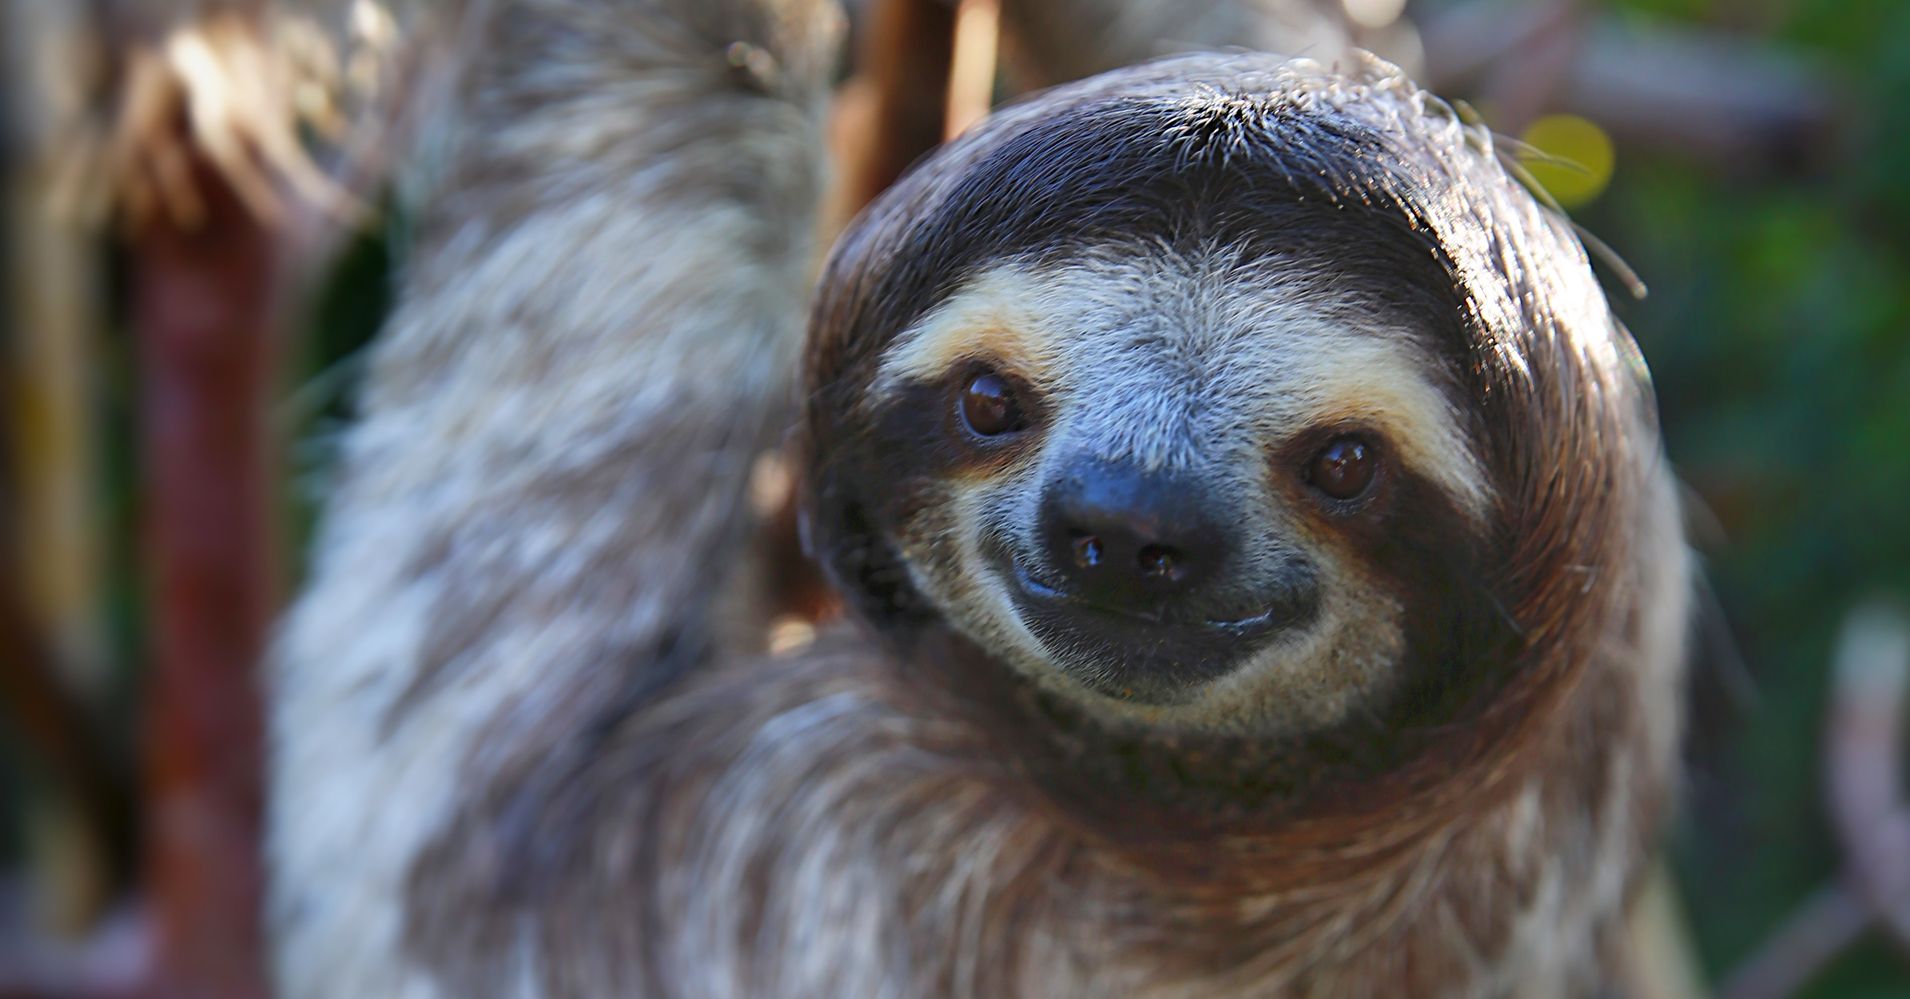 Dreaming Of Spending The Night Among Sloths? This Conservation Center Offers Sleepovers